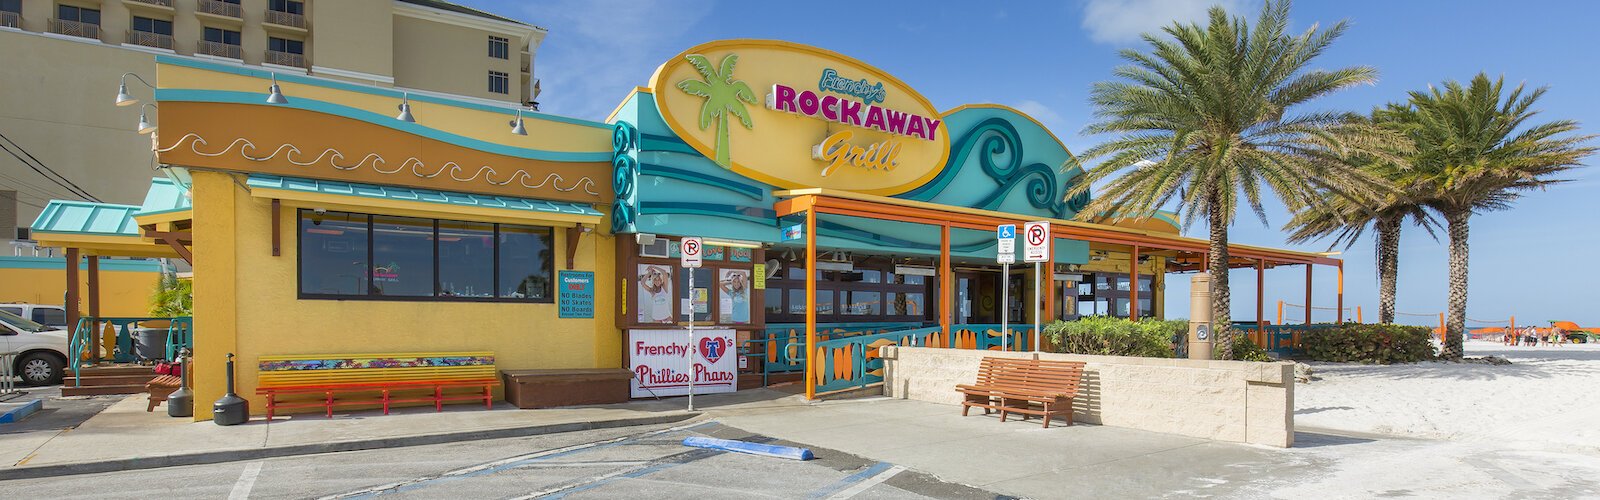 Frenchy’s Rockaway Grill on Clearwater Beach.